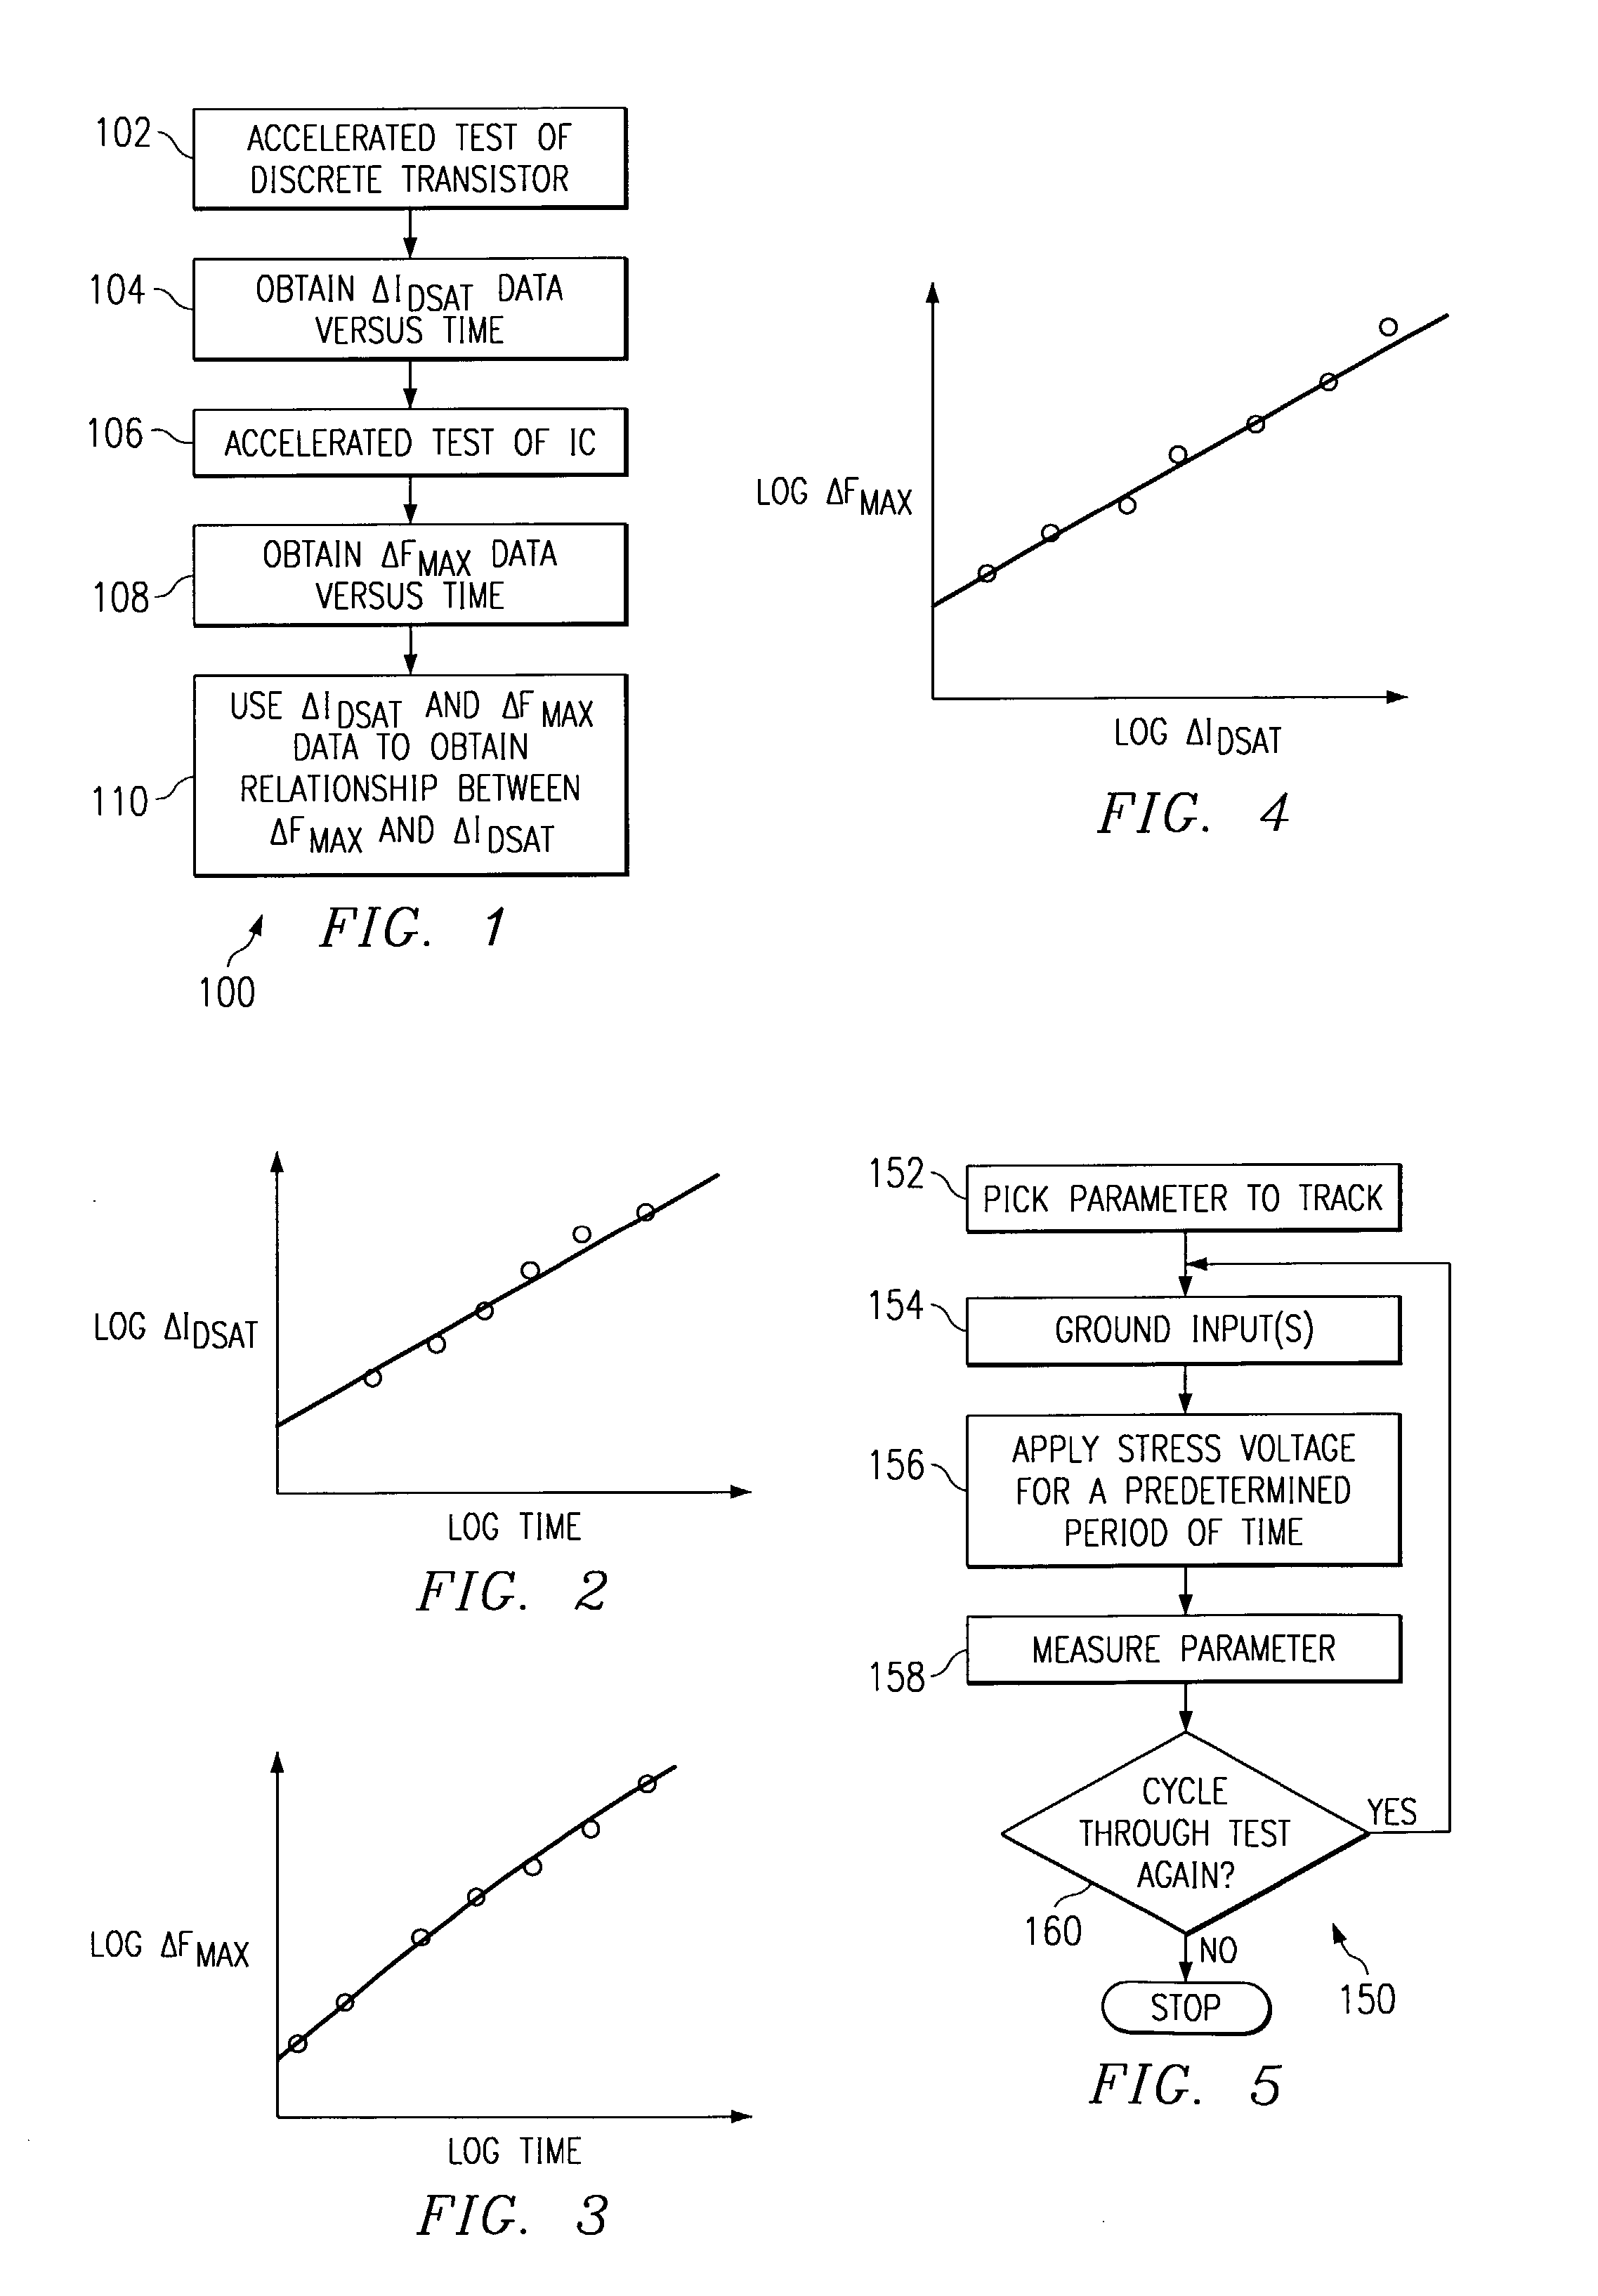 Method for predicting the degradation of an integrated circuit performance due to negative bias temperature instability